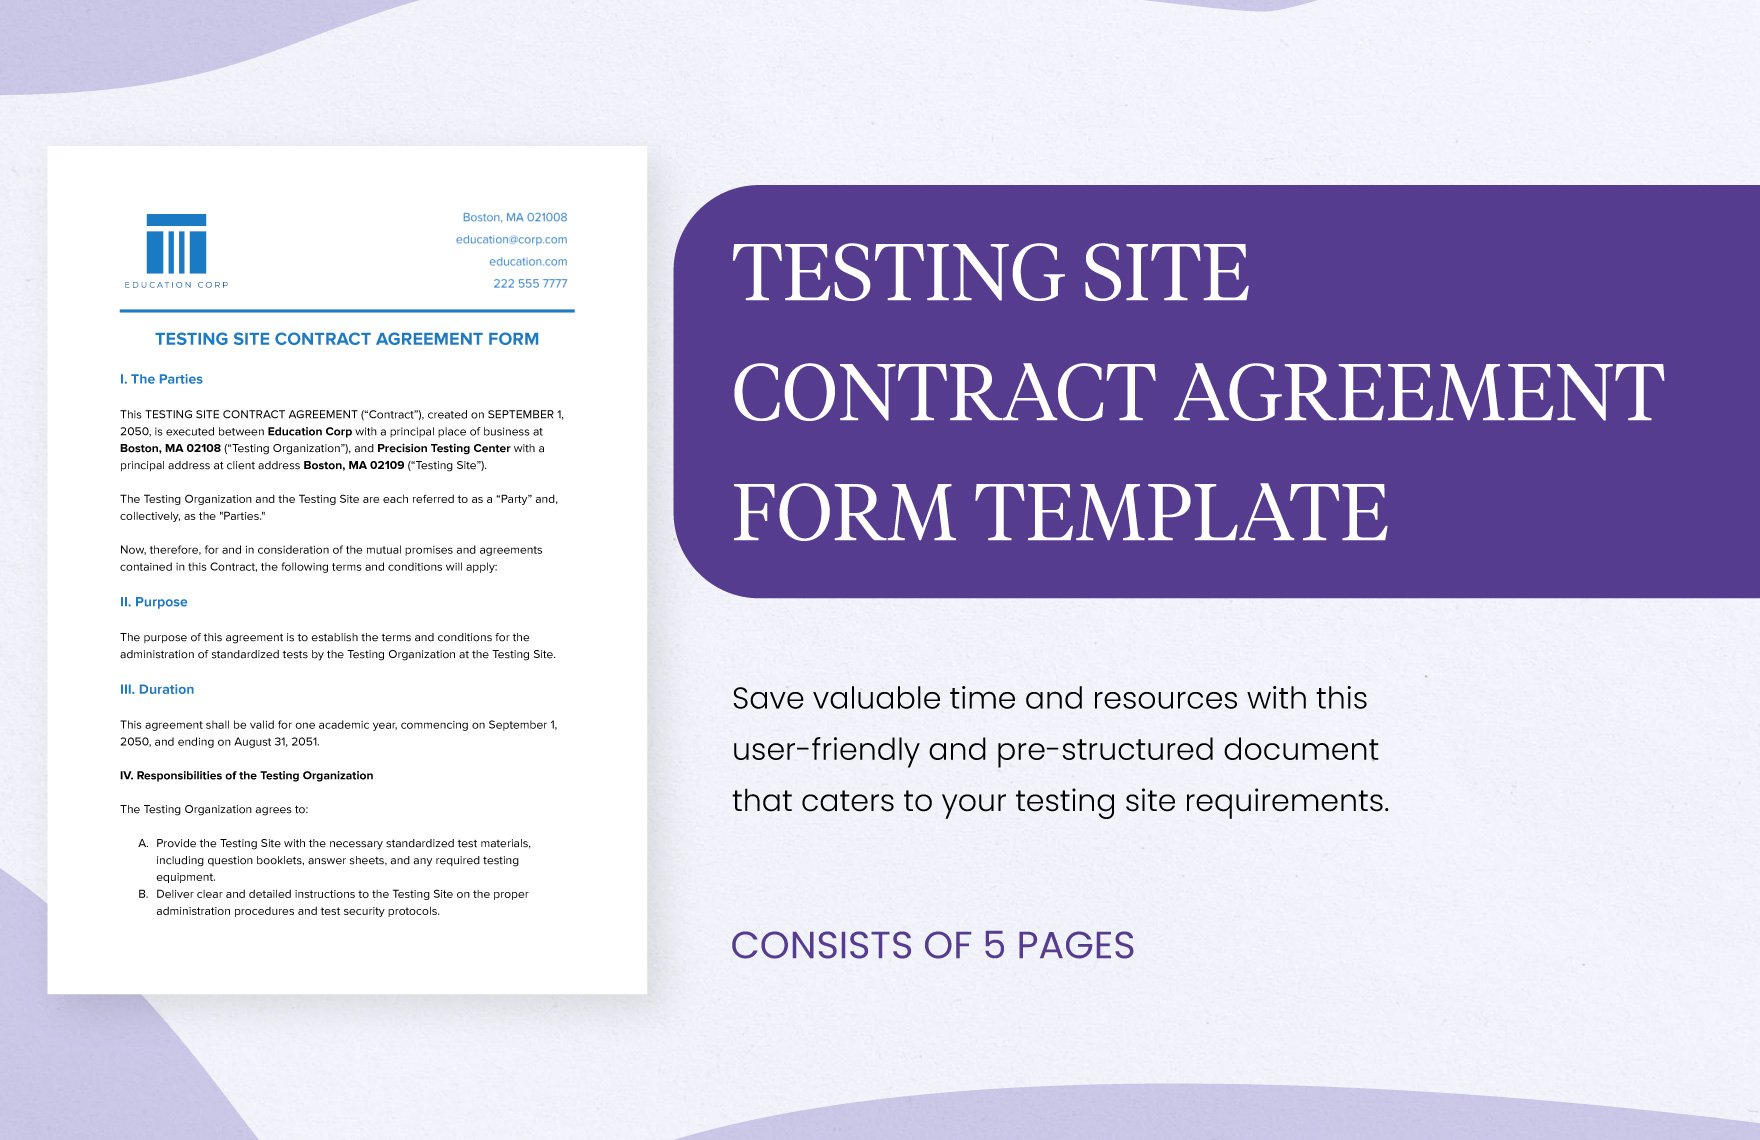 Testing Site Contract Agreement Form Template